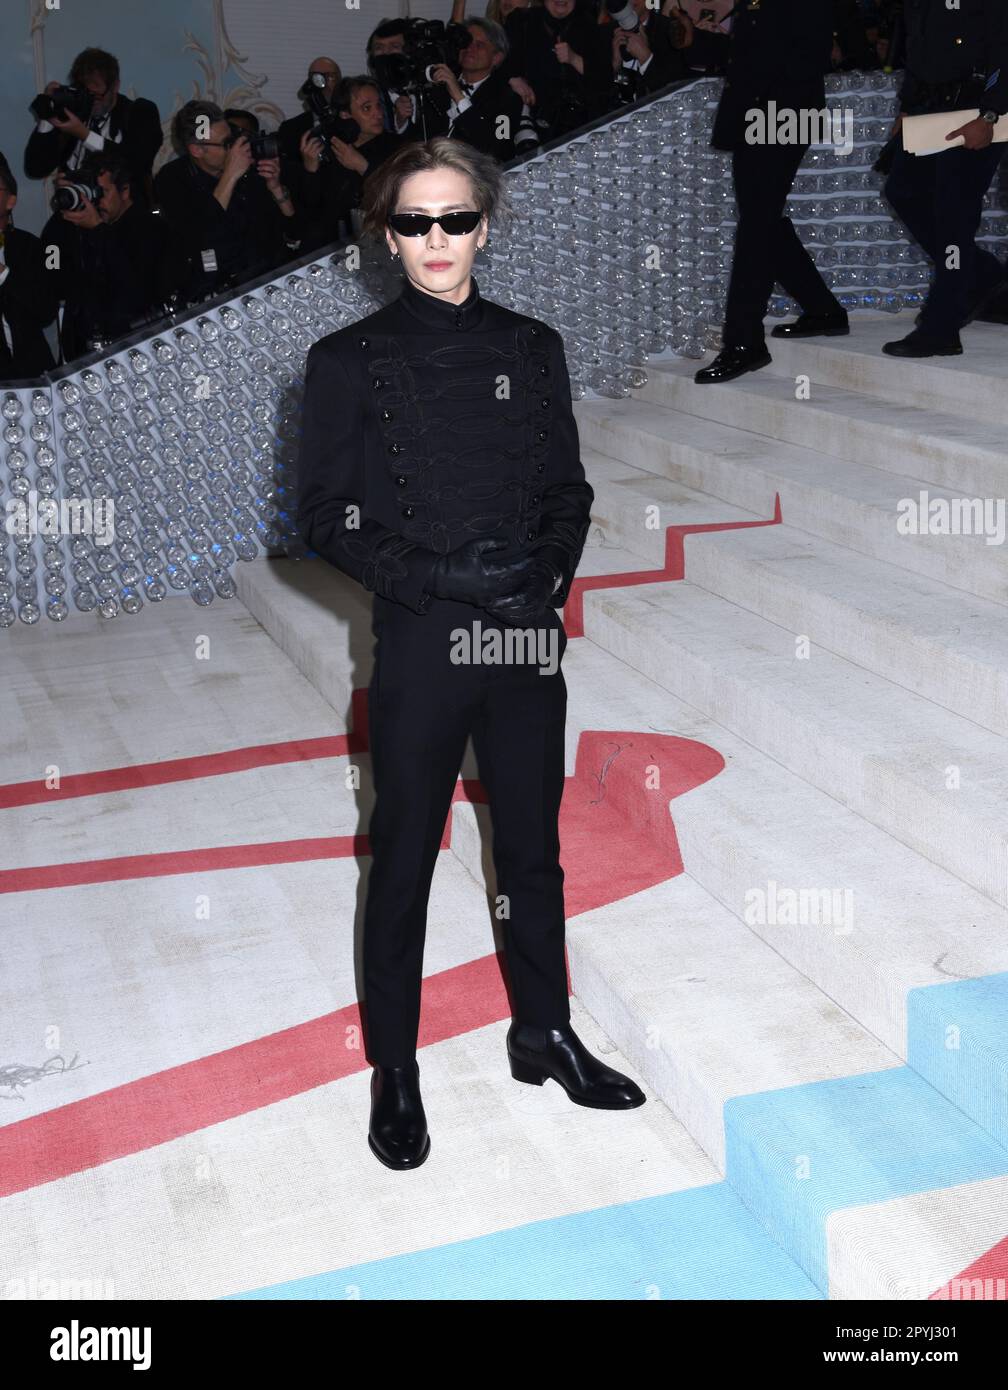 Jackson Wang attends the 2023 Met Gala in New York City.⁣ ⁣ Jackson Wang is  wearing an all-black custom-made Louis Vuitton suit paired with…